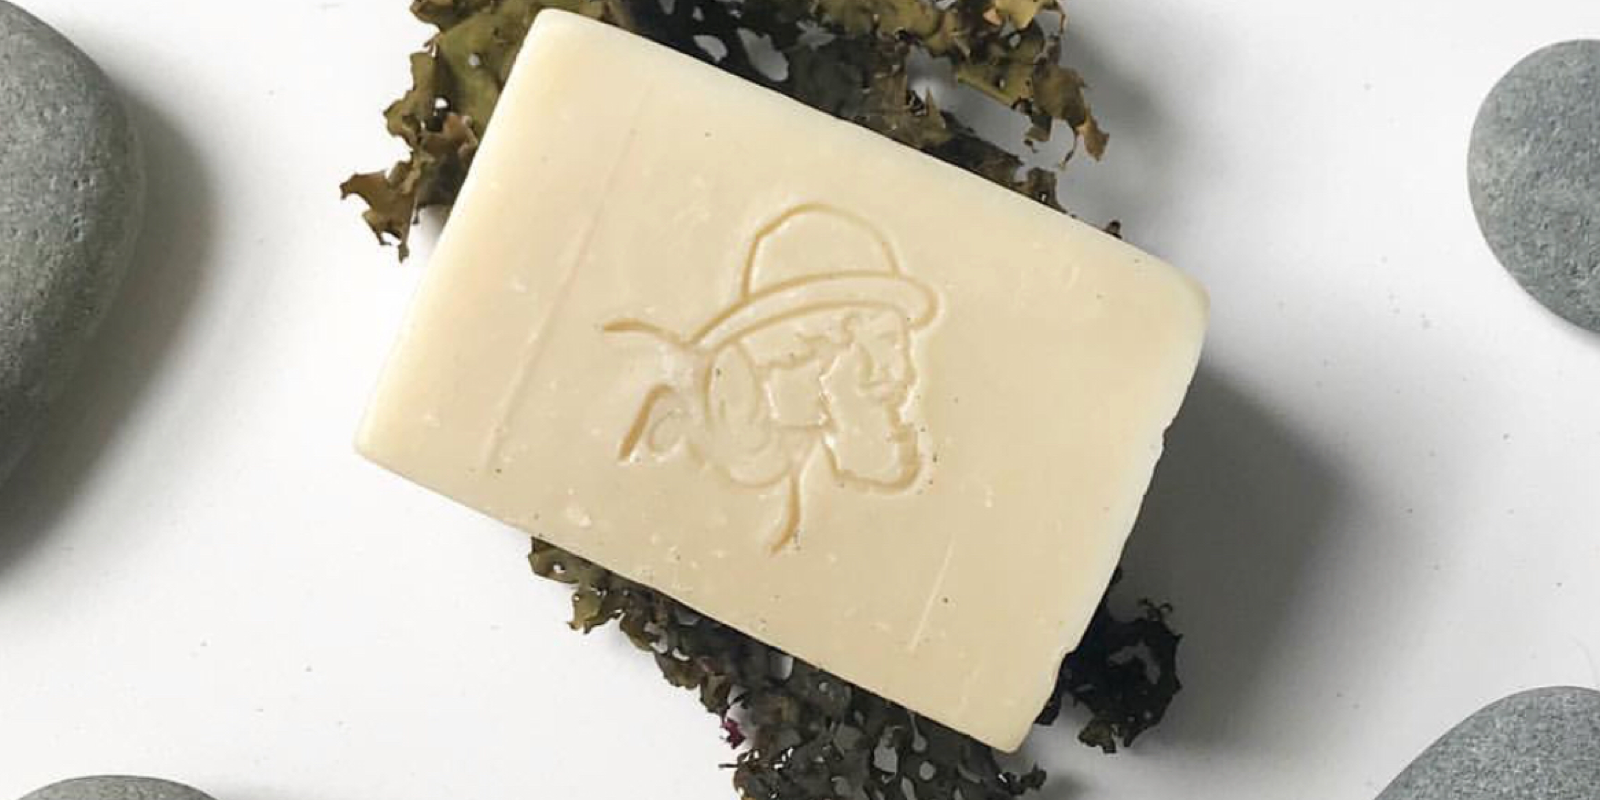 Natural Soap vs. Commercial Soap (What's The Difference?)